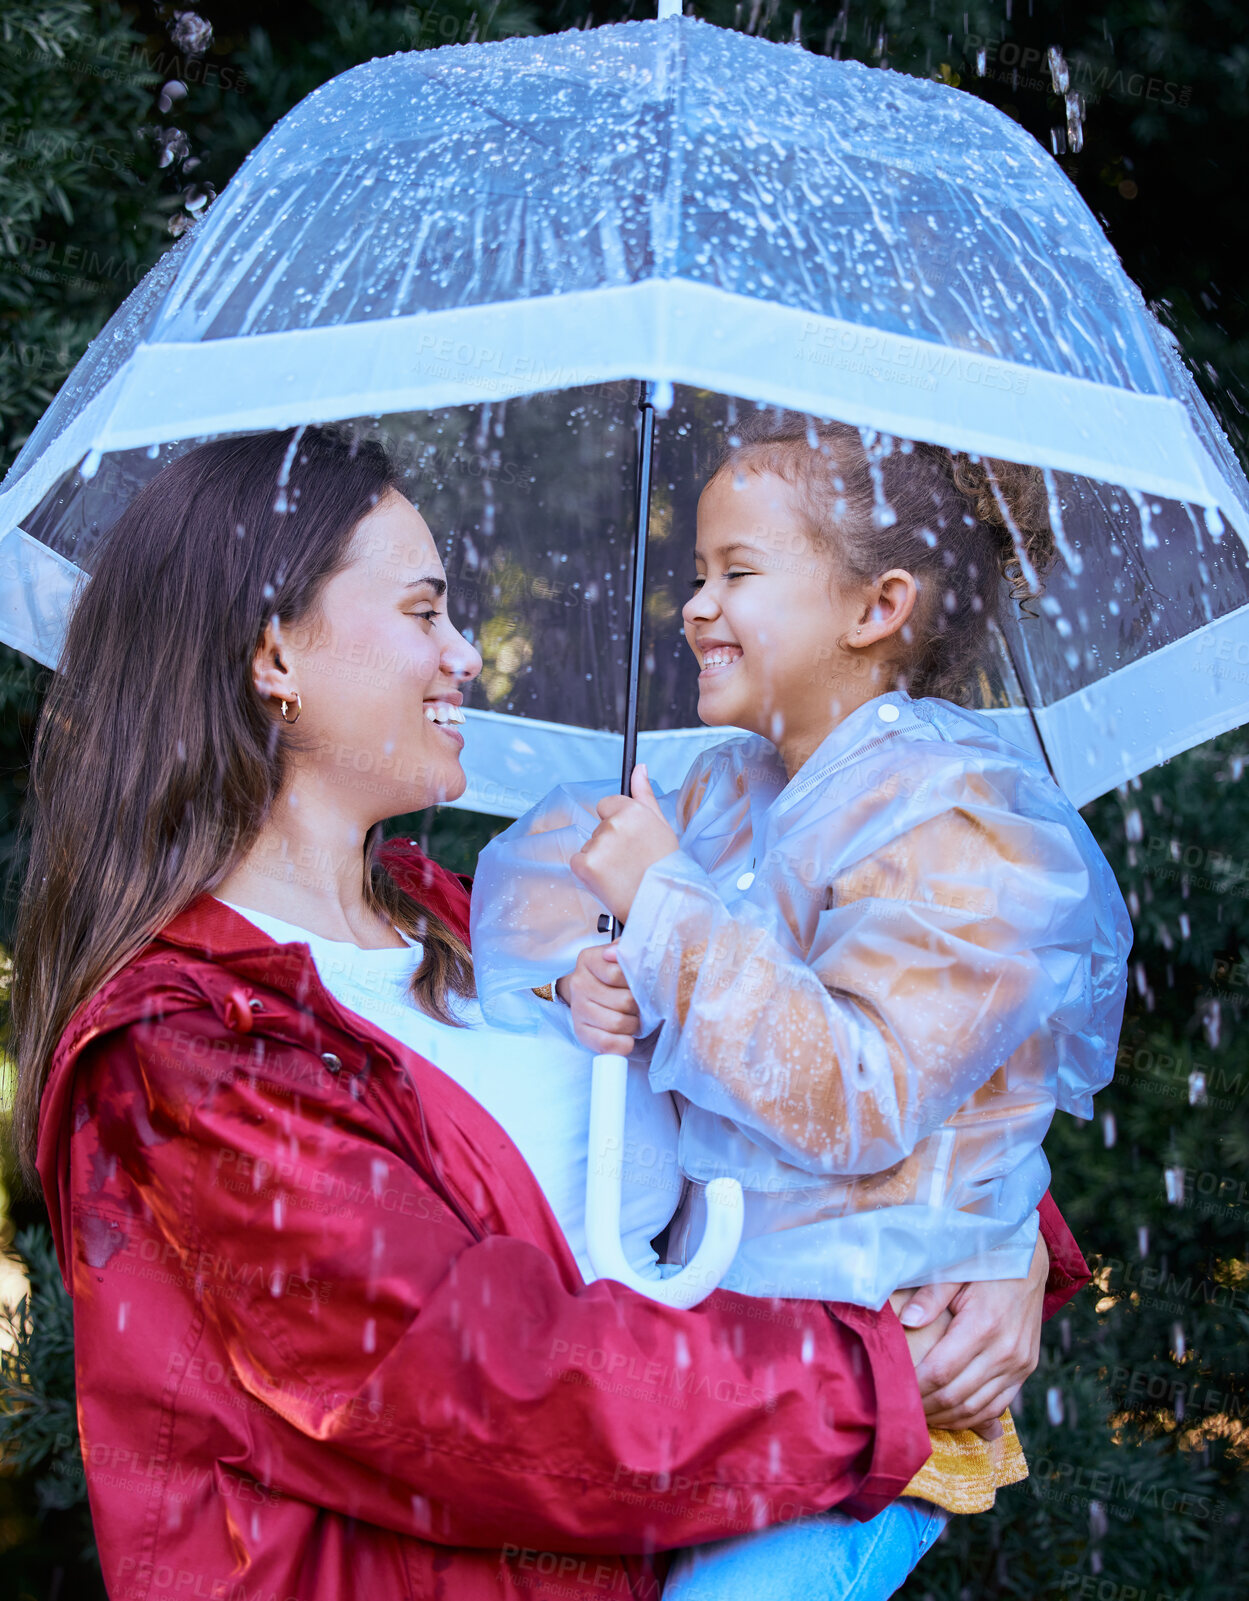 Buy stock photo Shot of a mother playing in the rain with her daughter